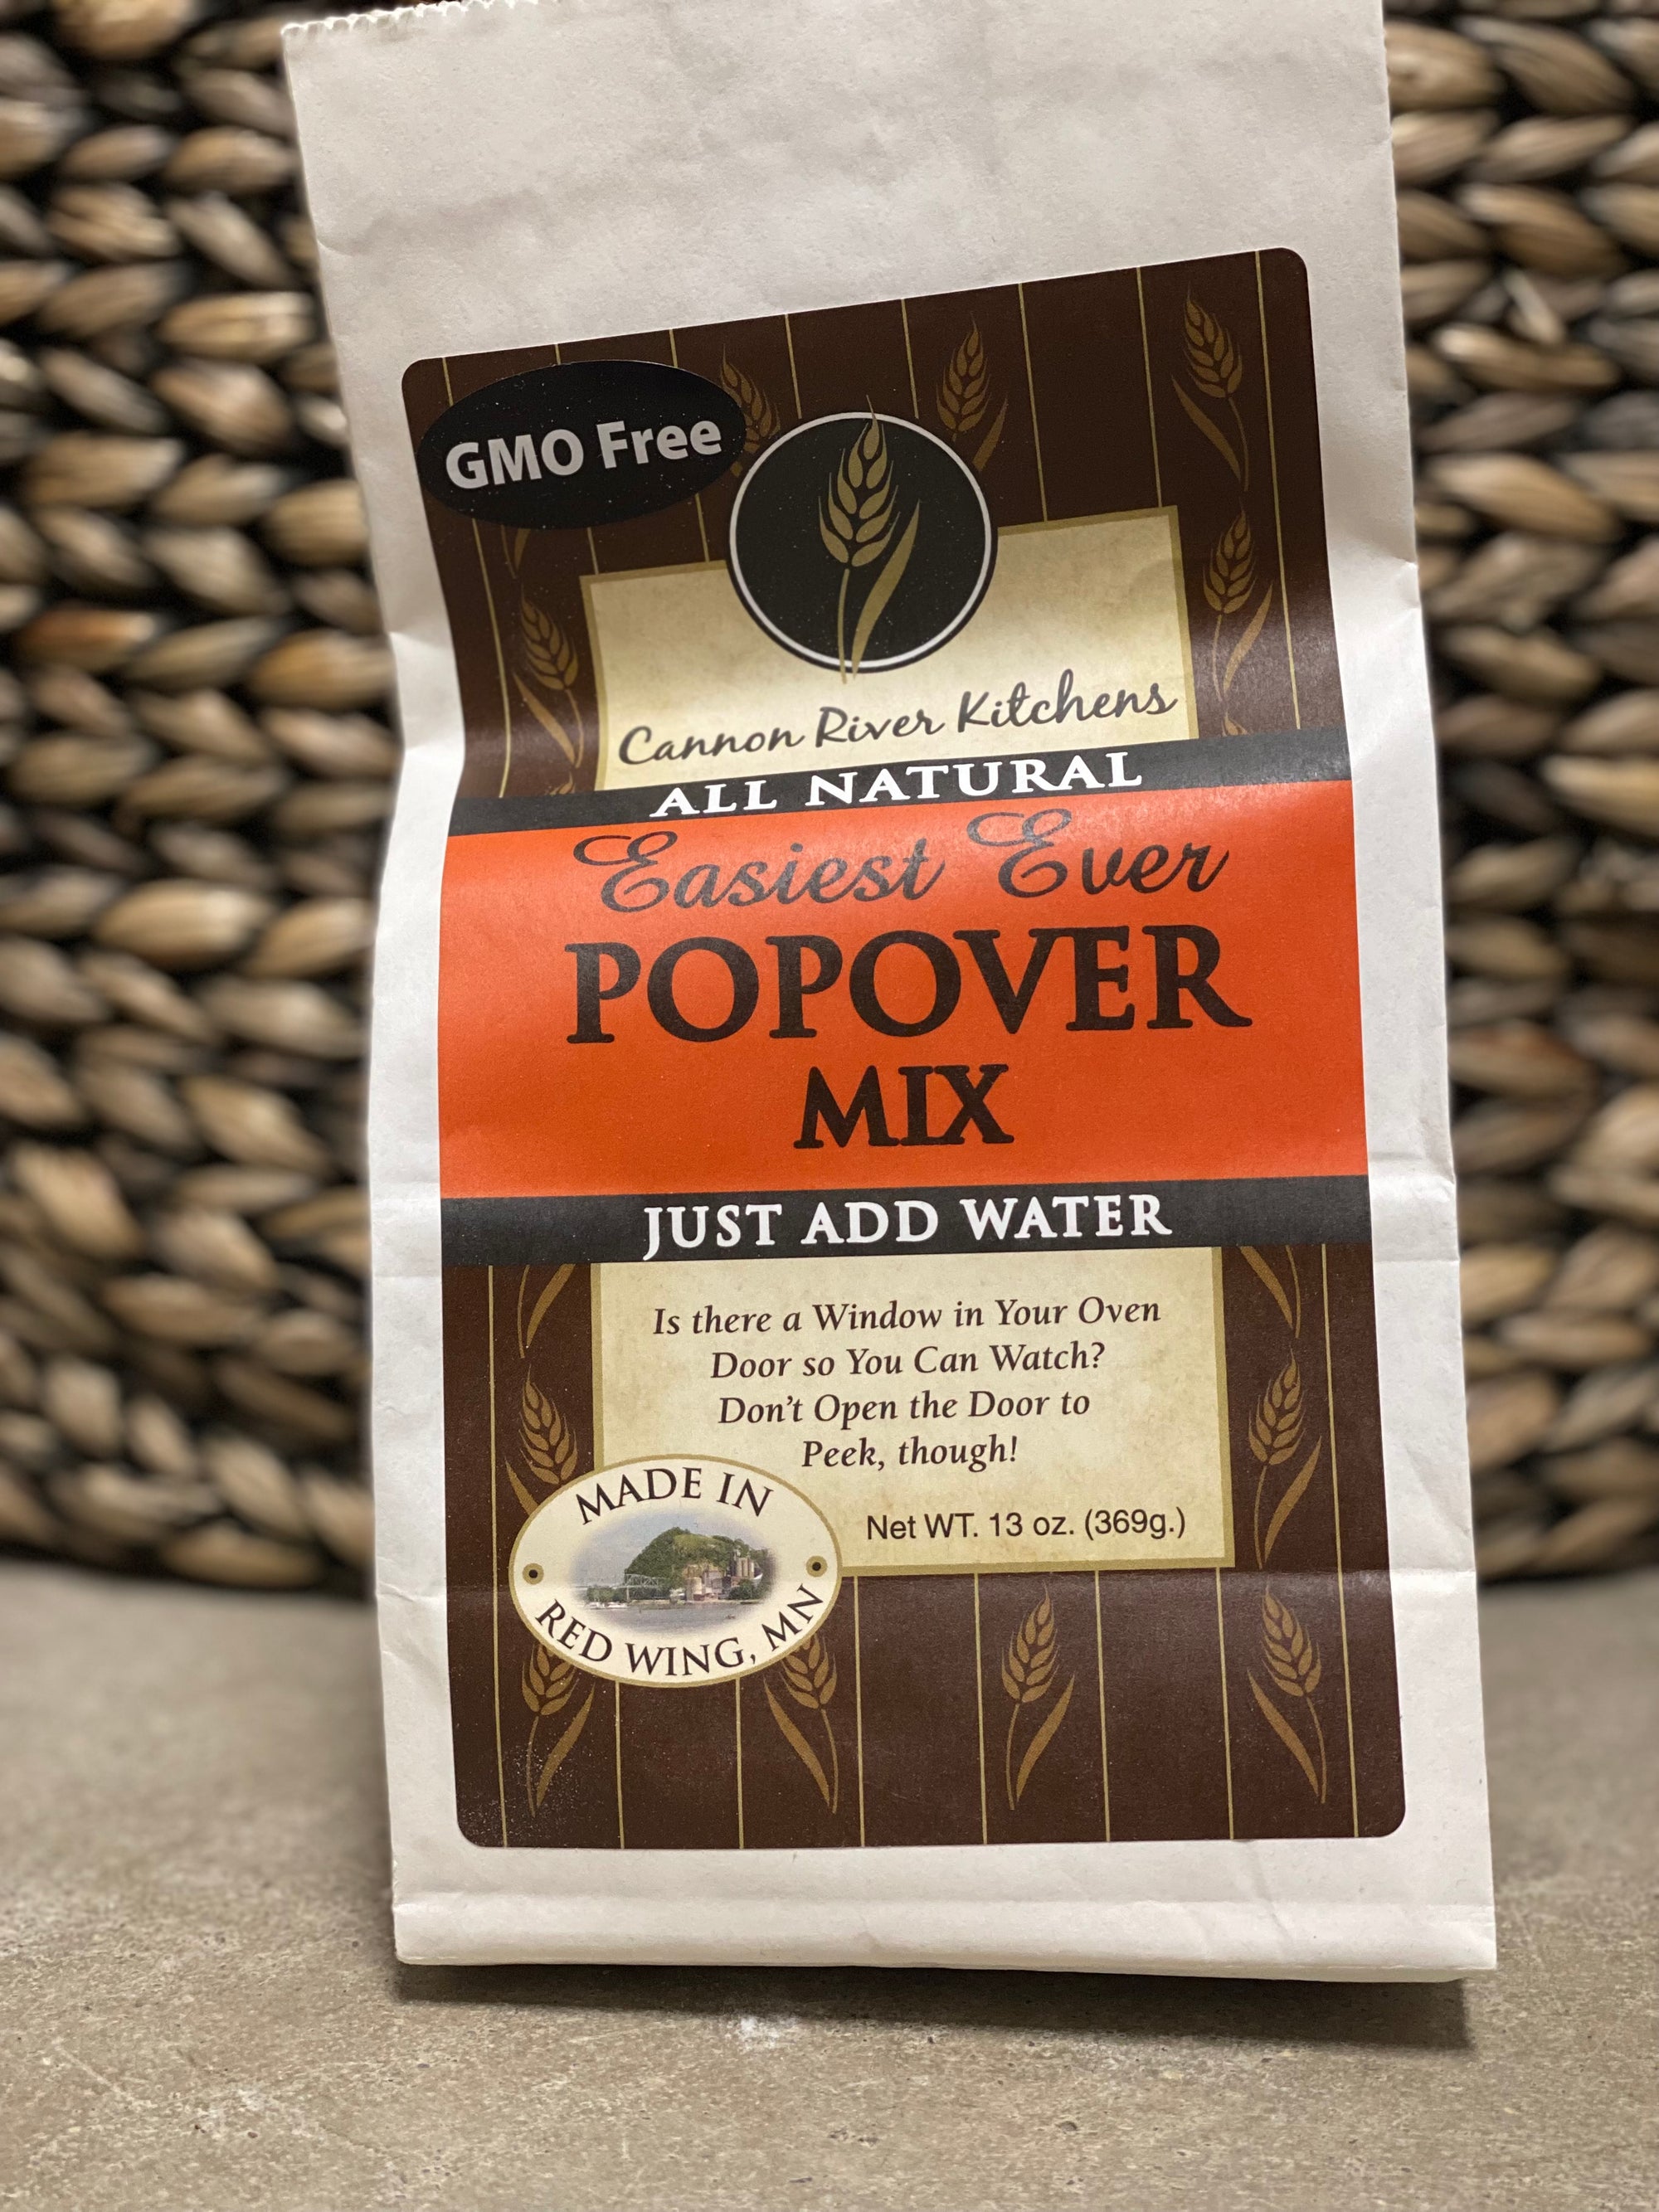 Popover Mix | Cannon River Kitchens